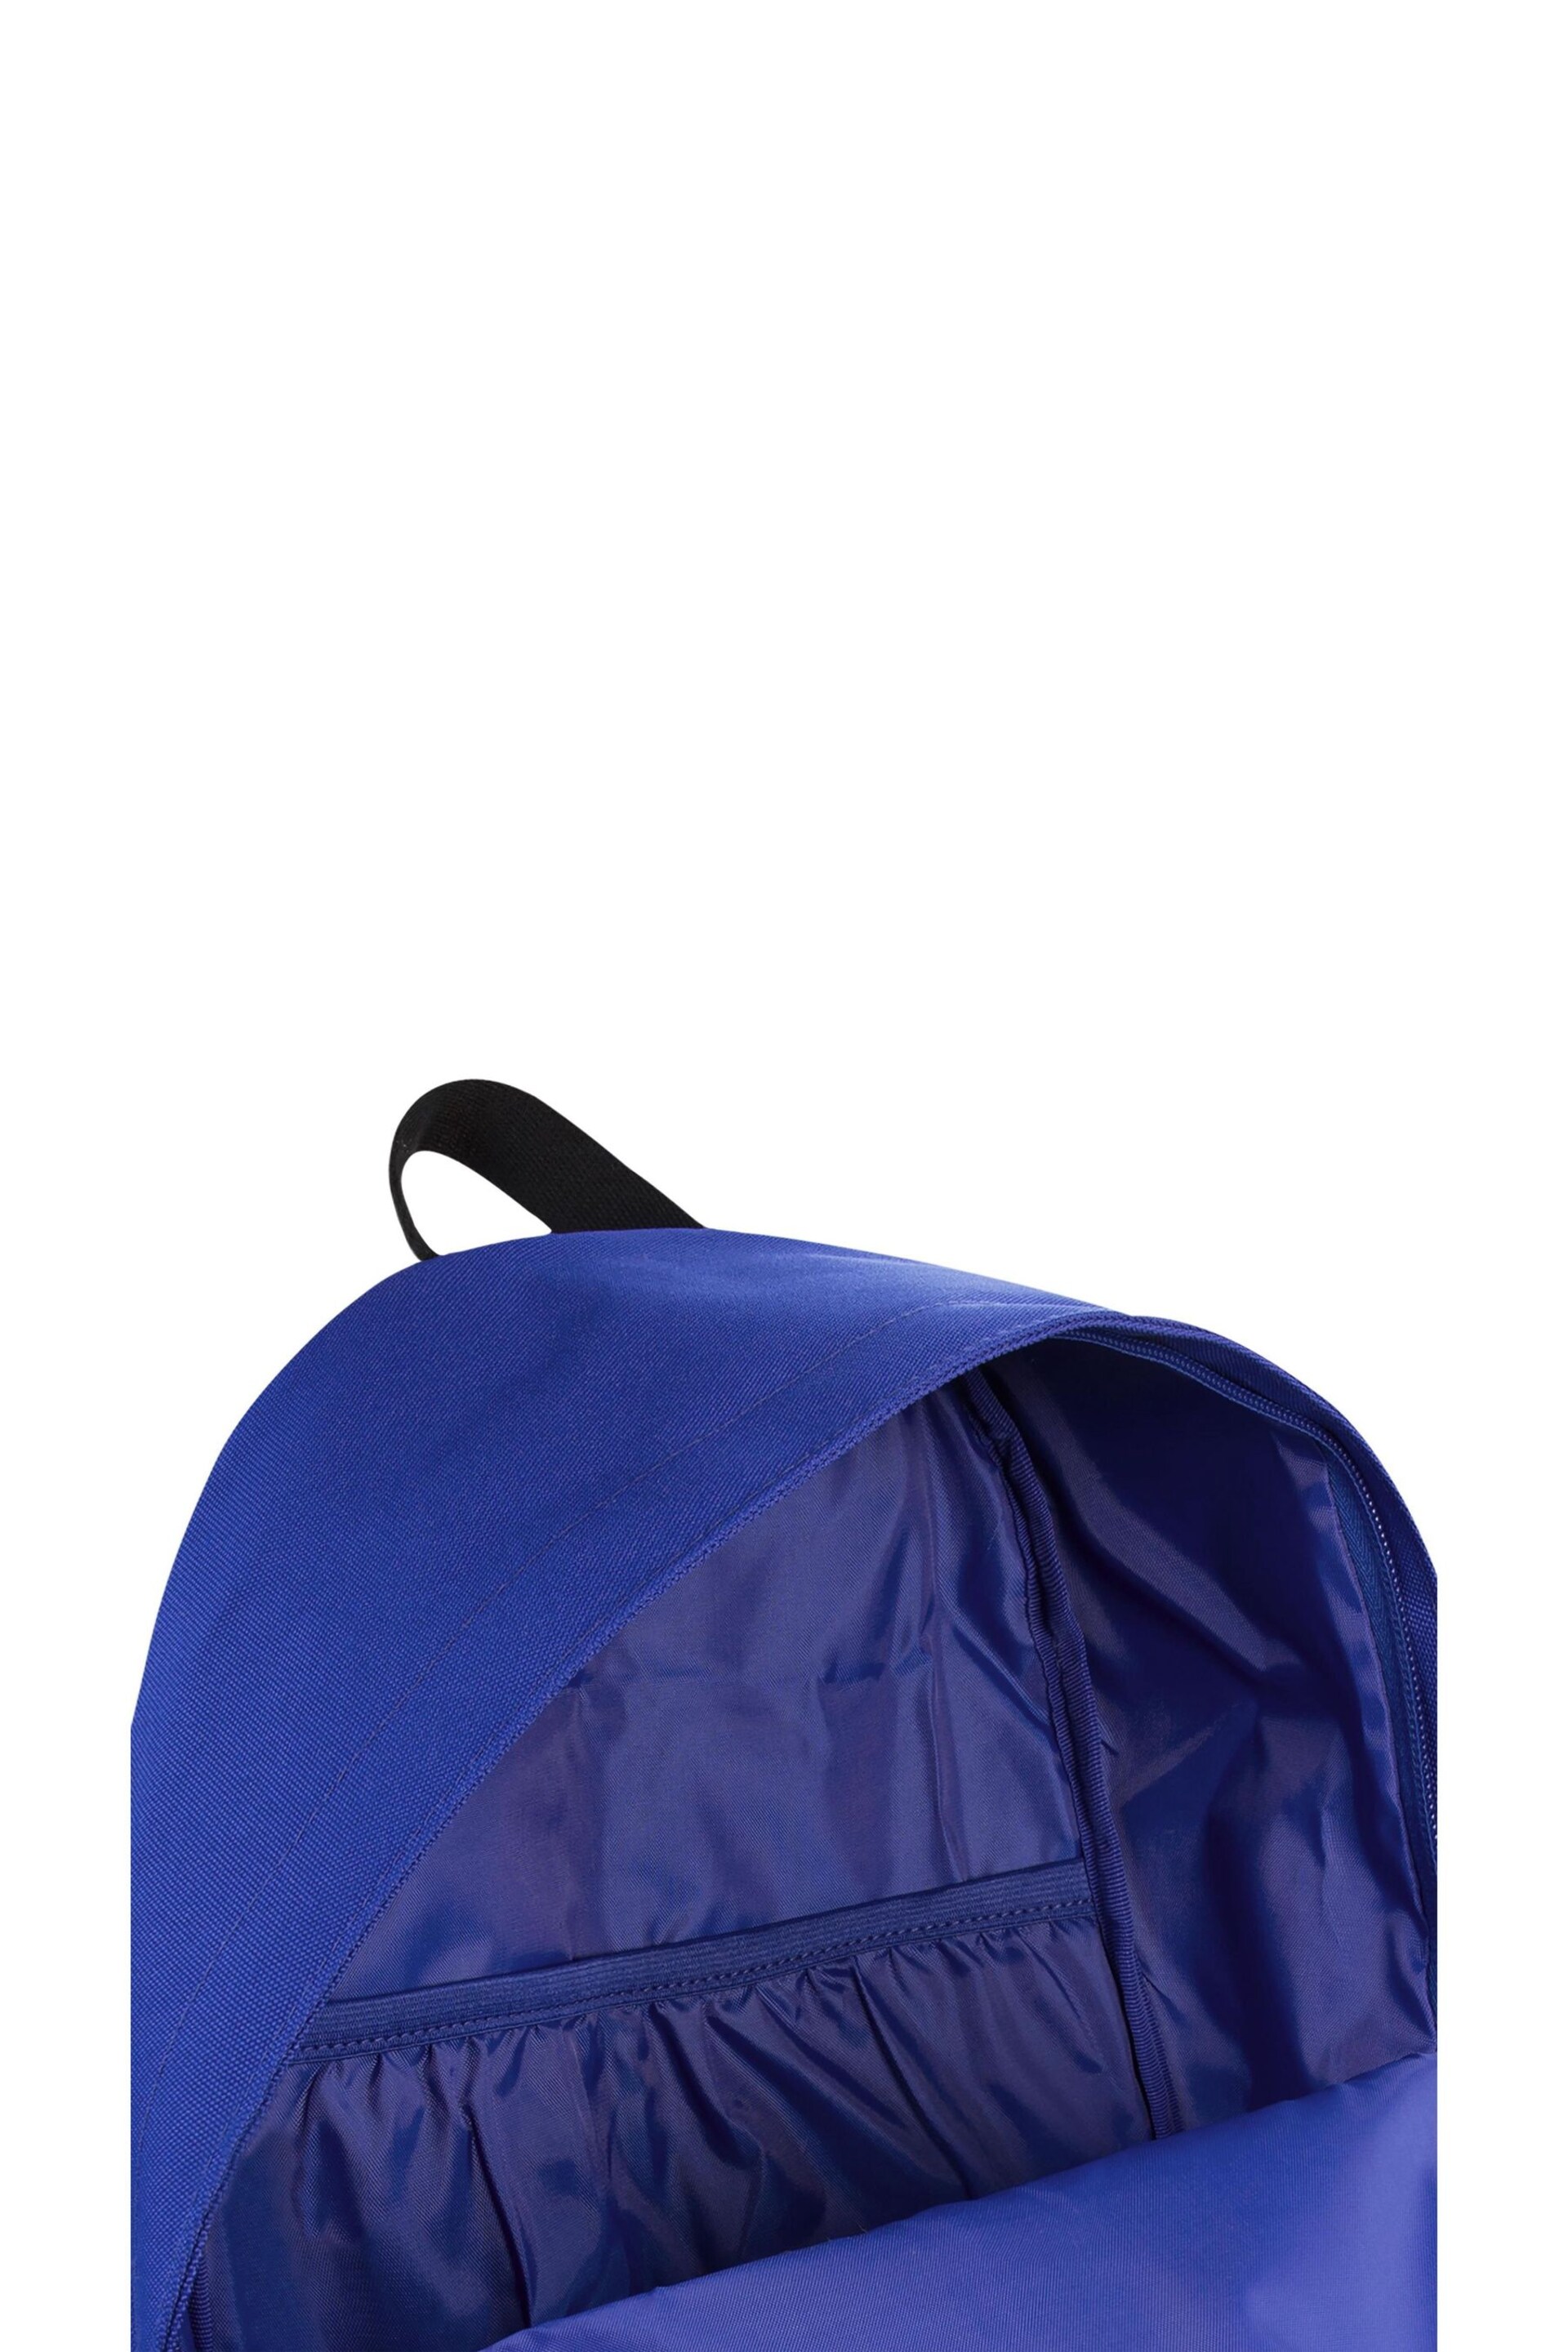 Converse Blue Kids Backpack - Image 10 of 10